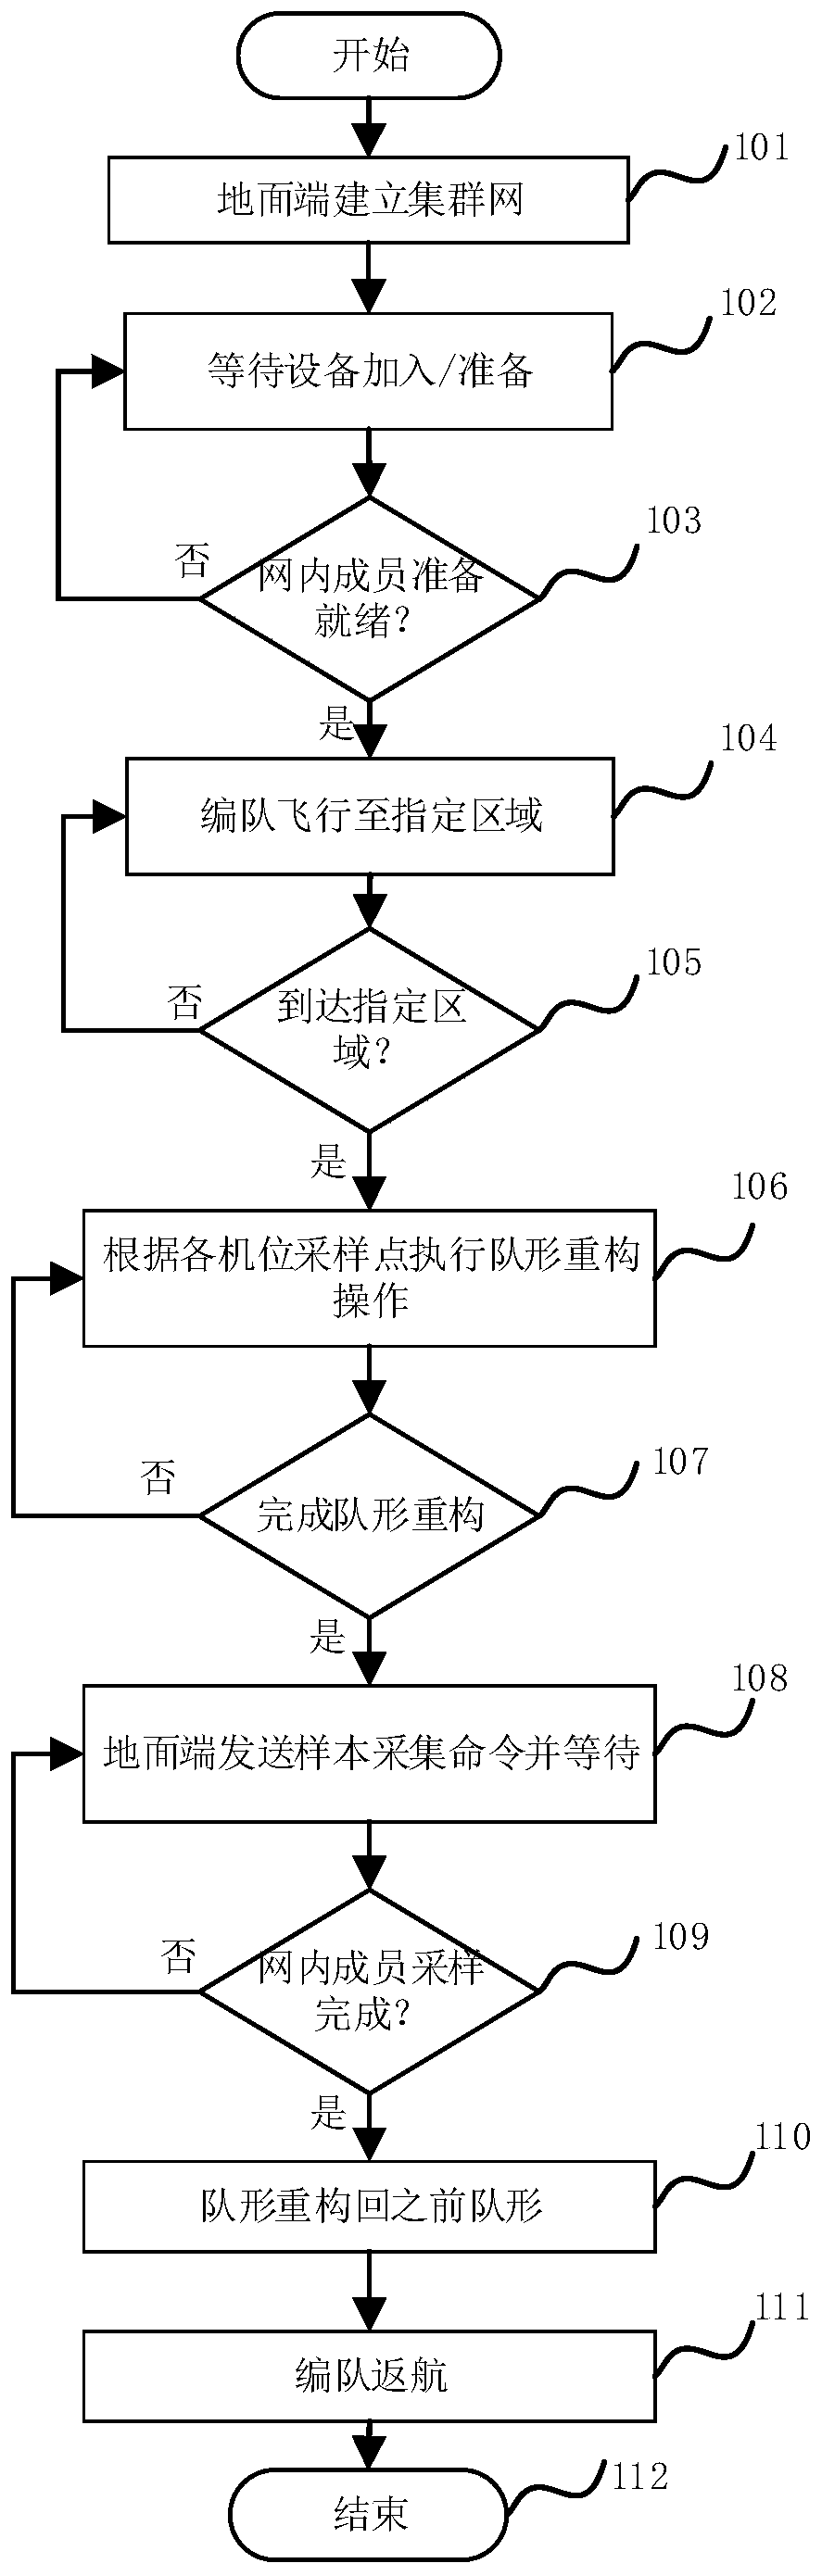 Multi-unmanned aerial vehicle cooperation method, system and device for multi-point water quality sampling